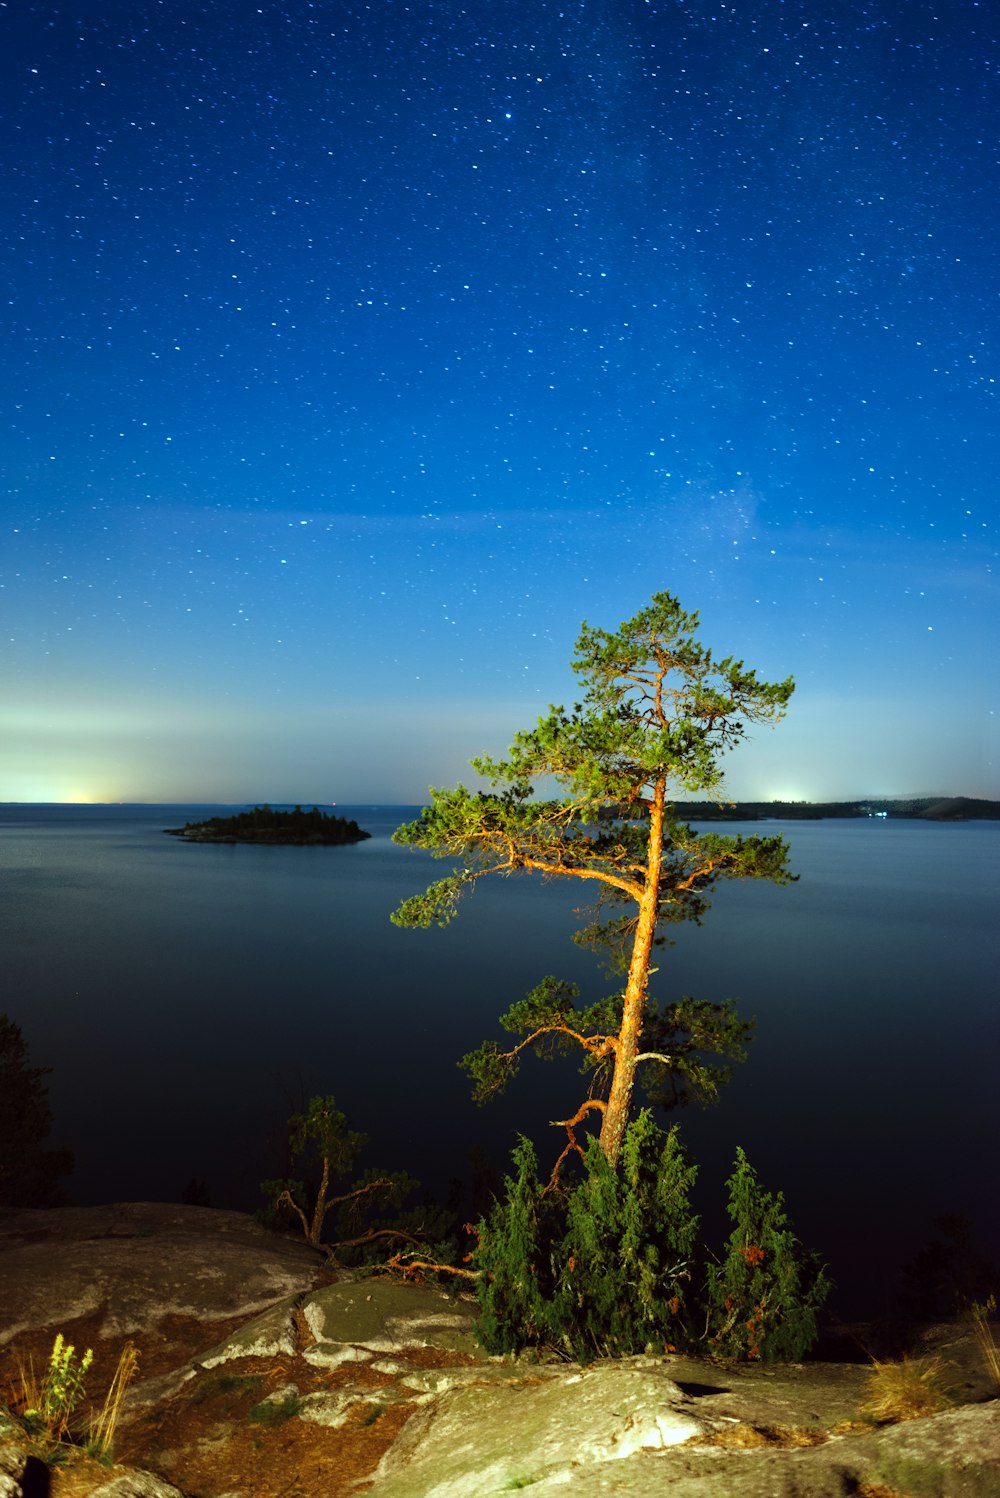 a tree on a rocky cliff overlooking a body of water